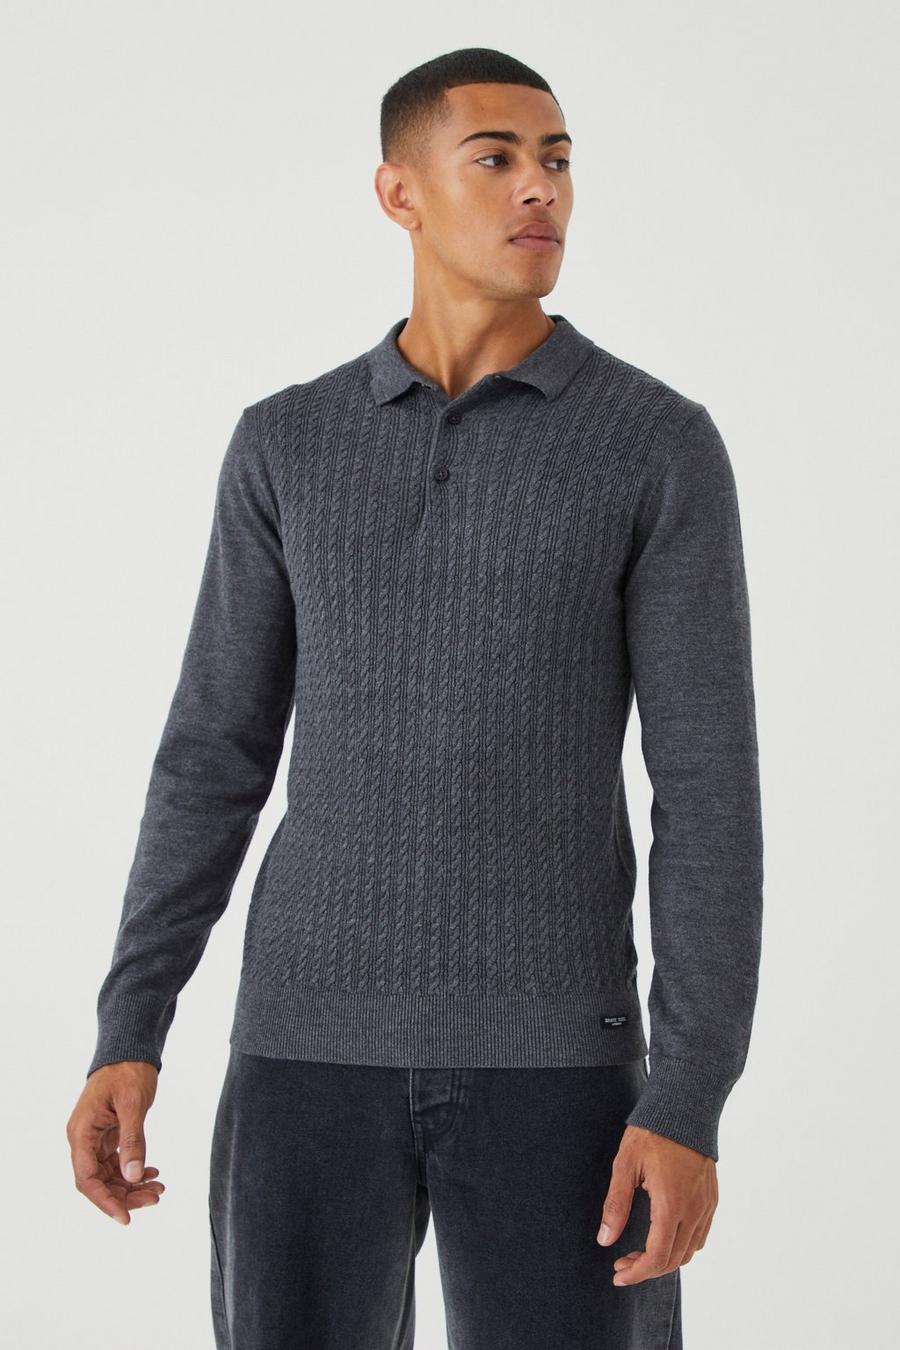 Short Sleeve Revere Cable Knit Shirt